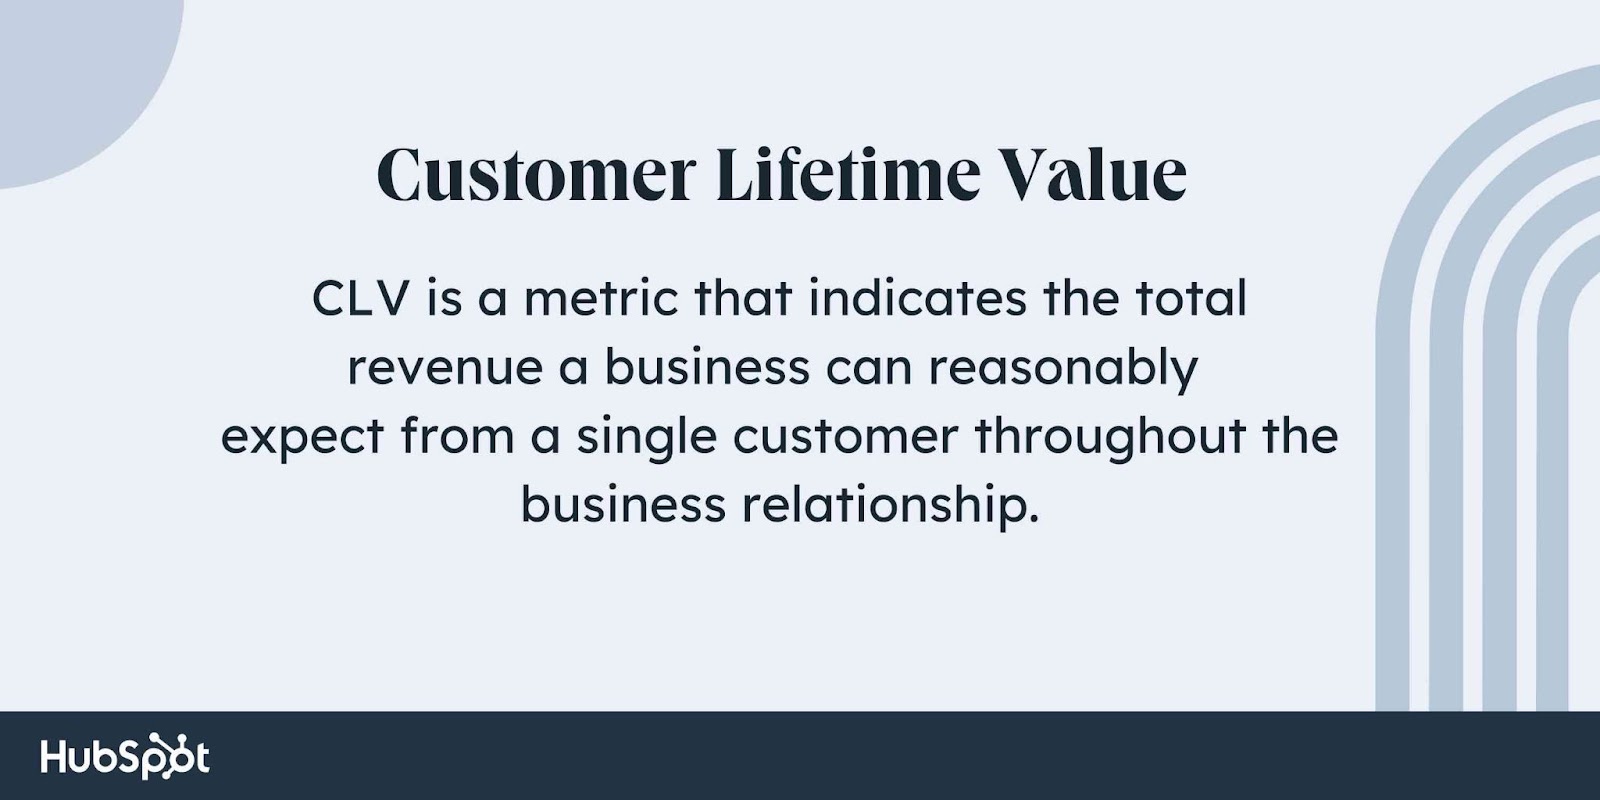 customer lifetime value definition, CLV is a metric that indicates the total revenue a business can reasonably expect from a single customer throughout the business relationship.